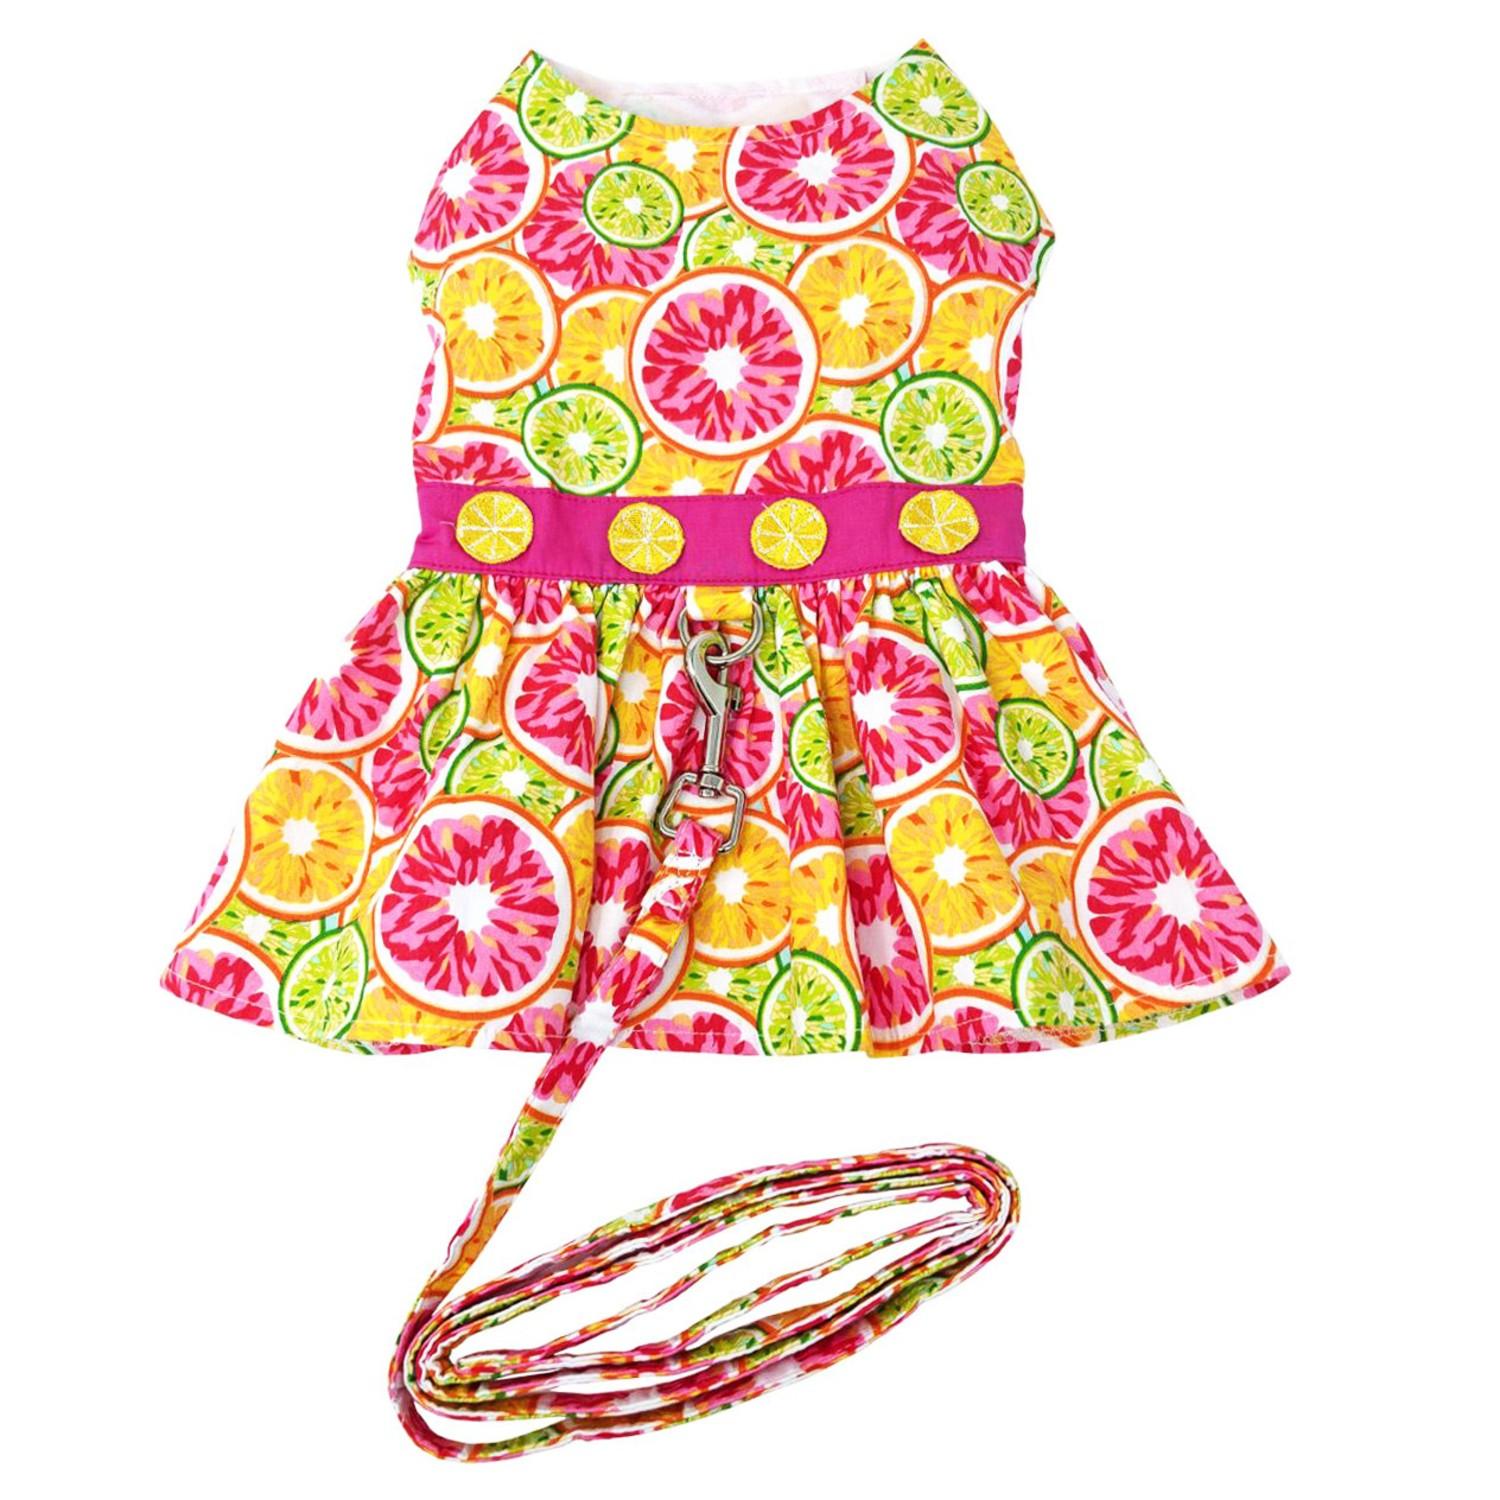 Citrus Slice Dog Harness Dress with Leash by Doggie Design